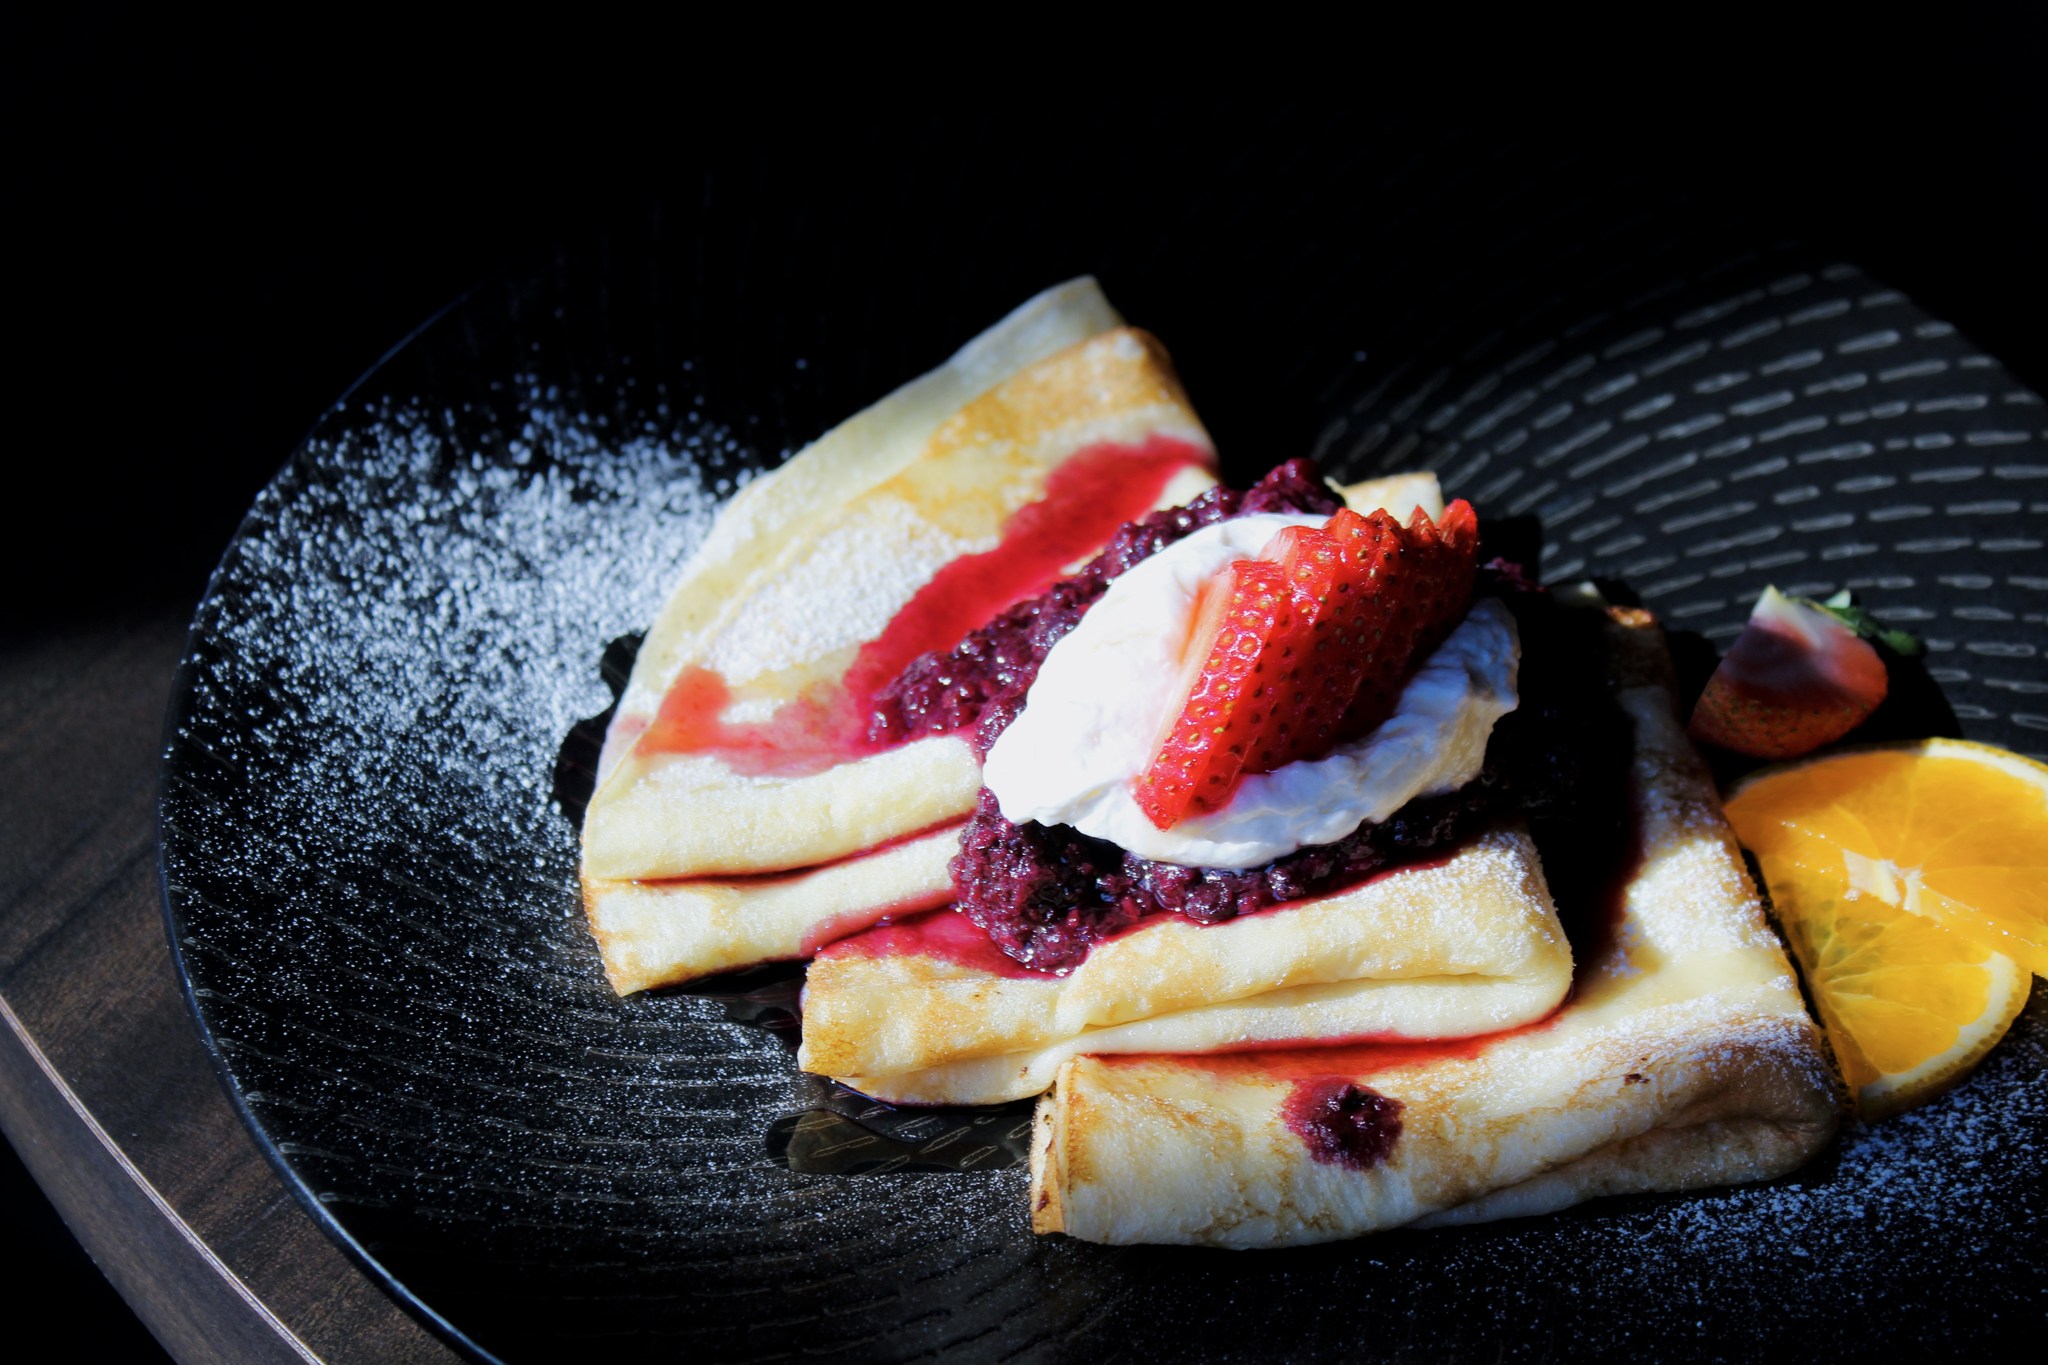 Skal Finnish pancakes with 3-berry compote, folded in thirds and laid out on a black plate and dusted with powdered sugar.